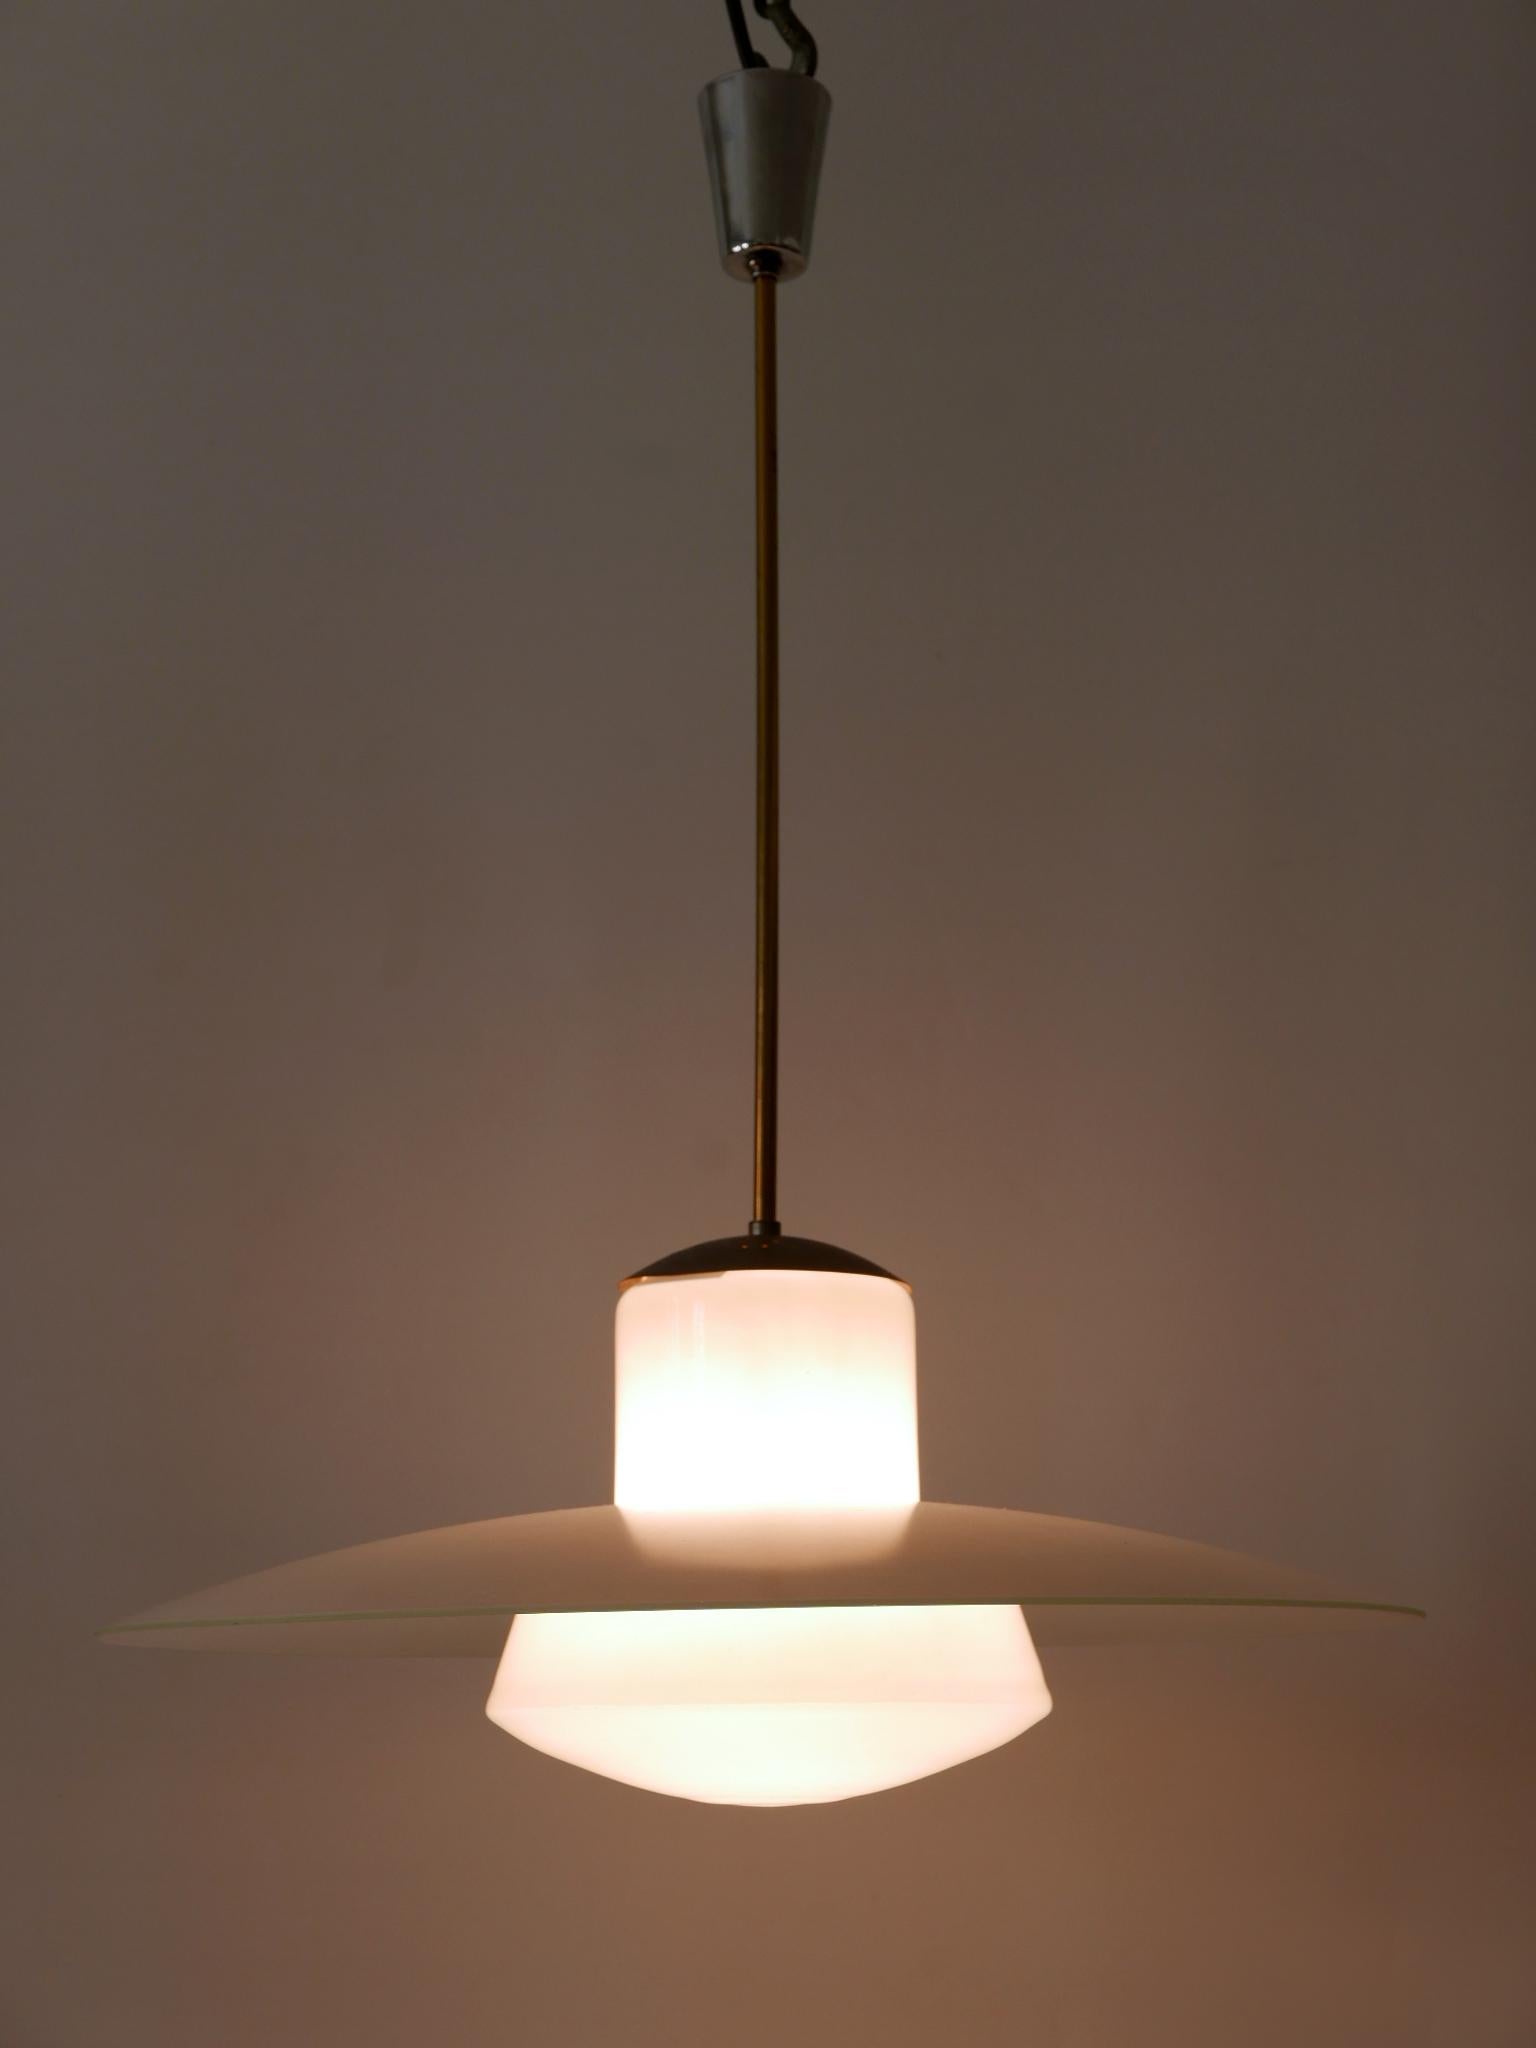 Rare Mid-Century Modern Pendant Lamp by Wolfgang Tümpel for Doria Germany 1950s For Sale 7